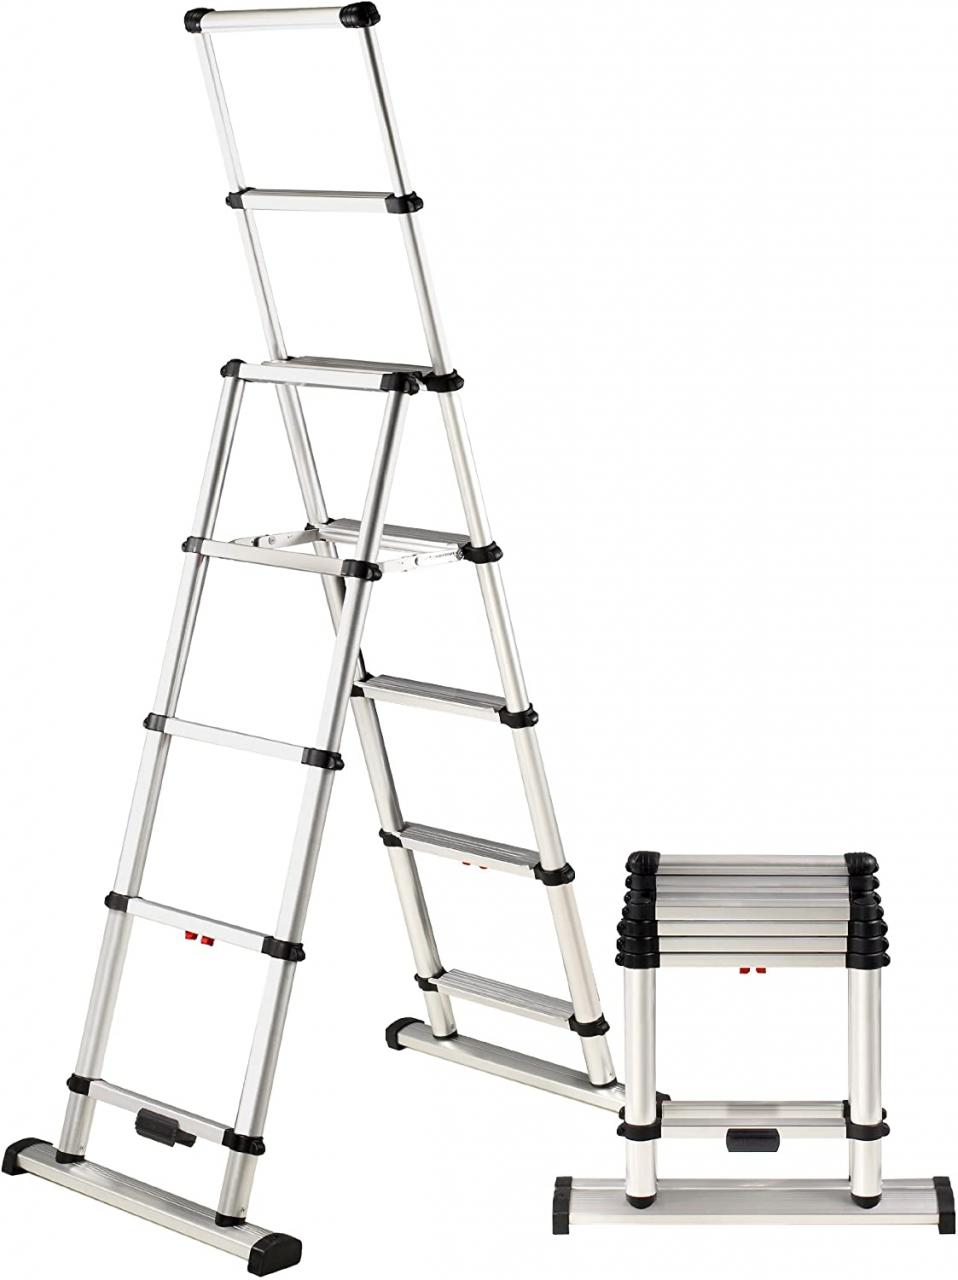 Buy Telesteps 10ES The World's Only Fully Automatic Telescoping Ladders,  with Patented One-Touch Release, OSHA Compliant 6 ft, Wide Pro Step,  Telescoping A-frame stepladder, with 2 extra safety leaning rungs, Up to